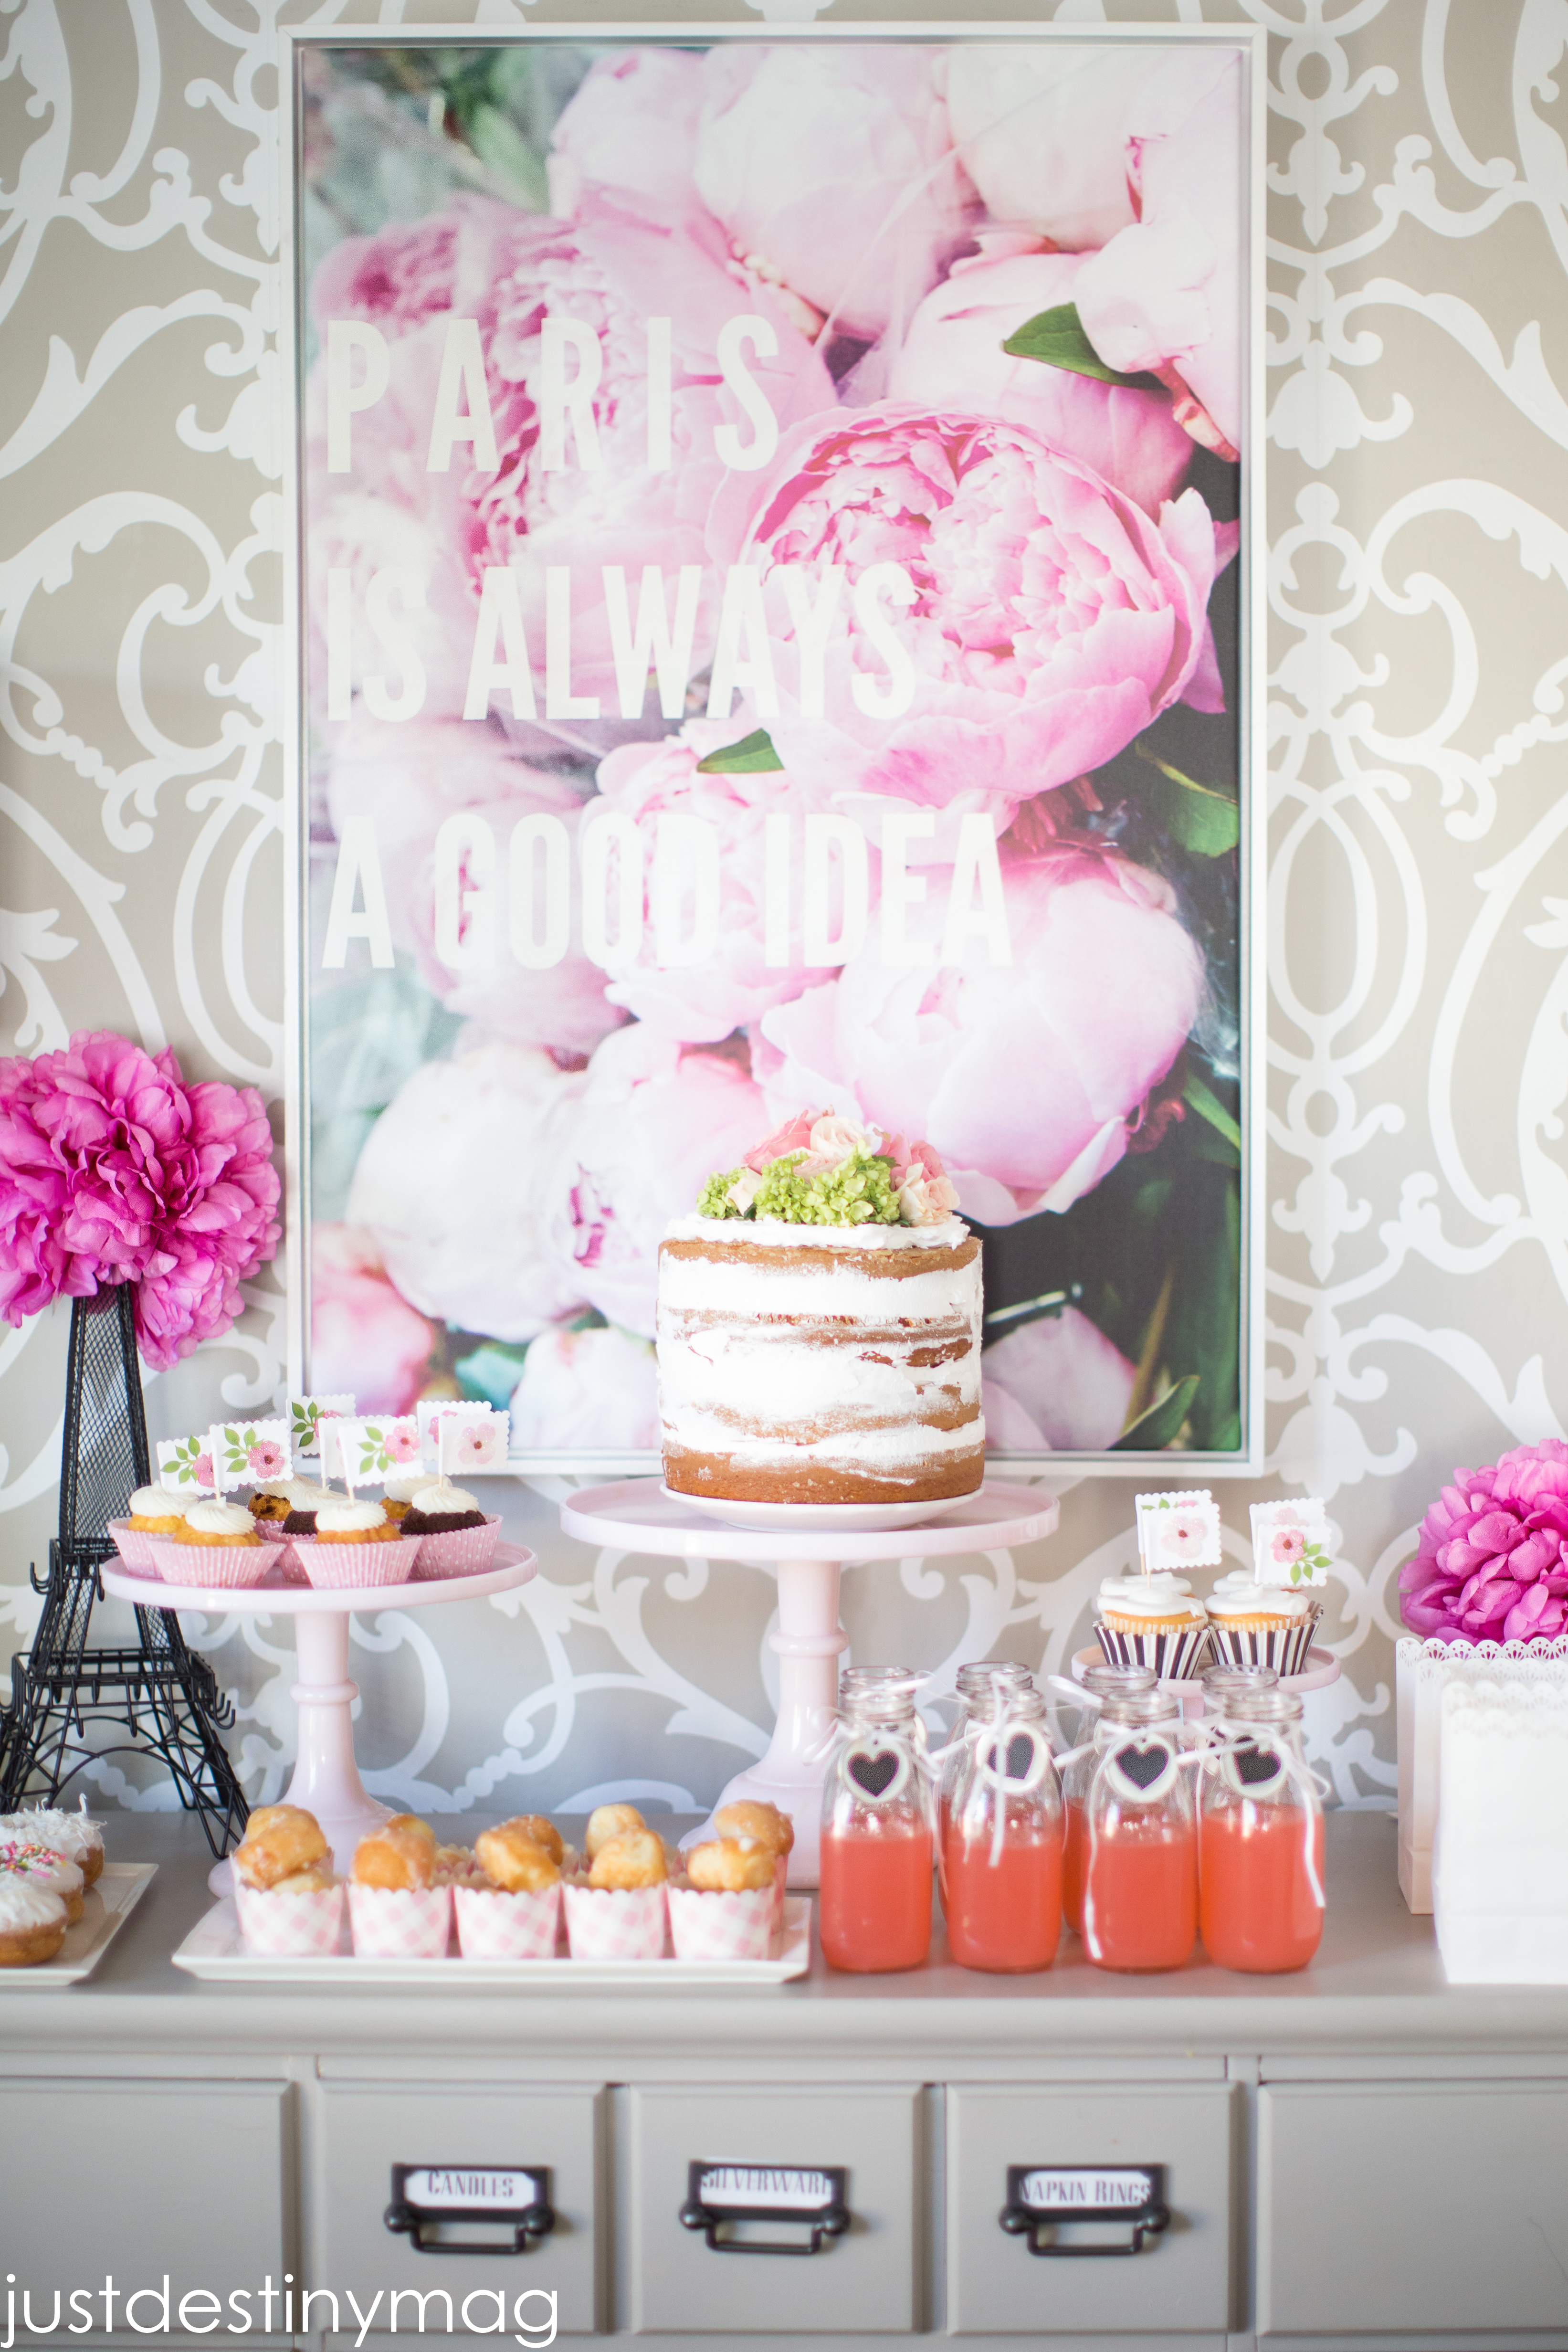 Pin on Chanel inspired party ideas